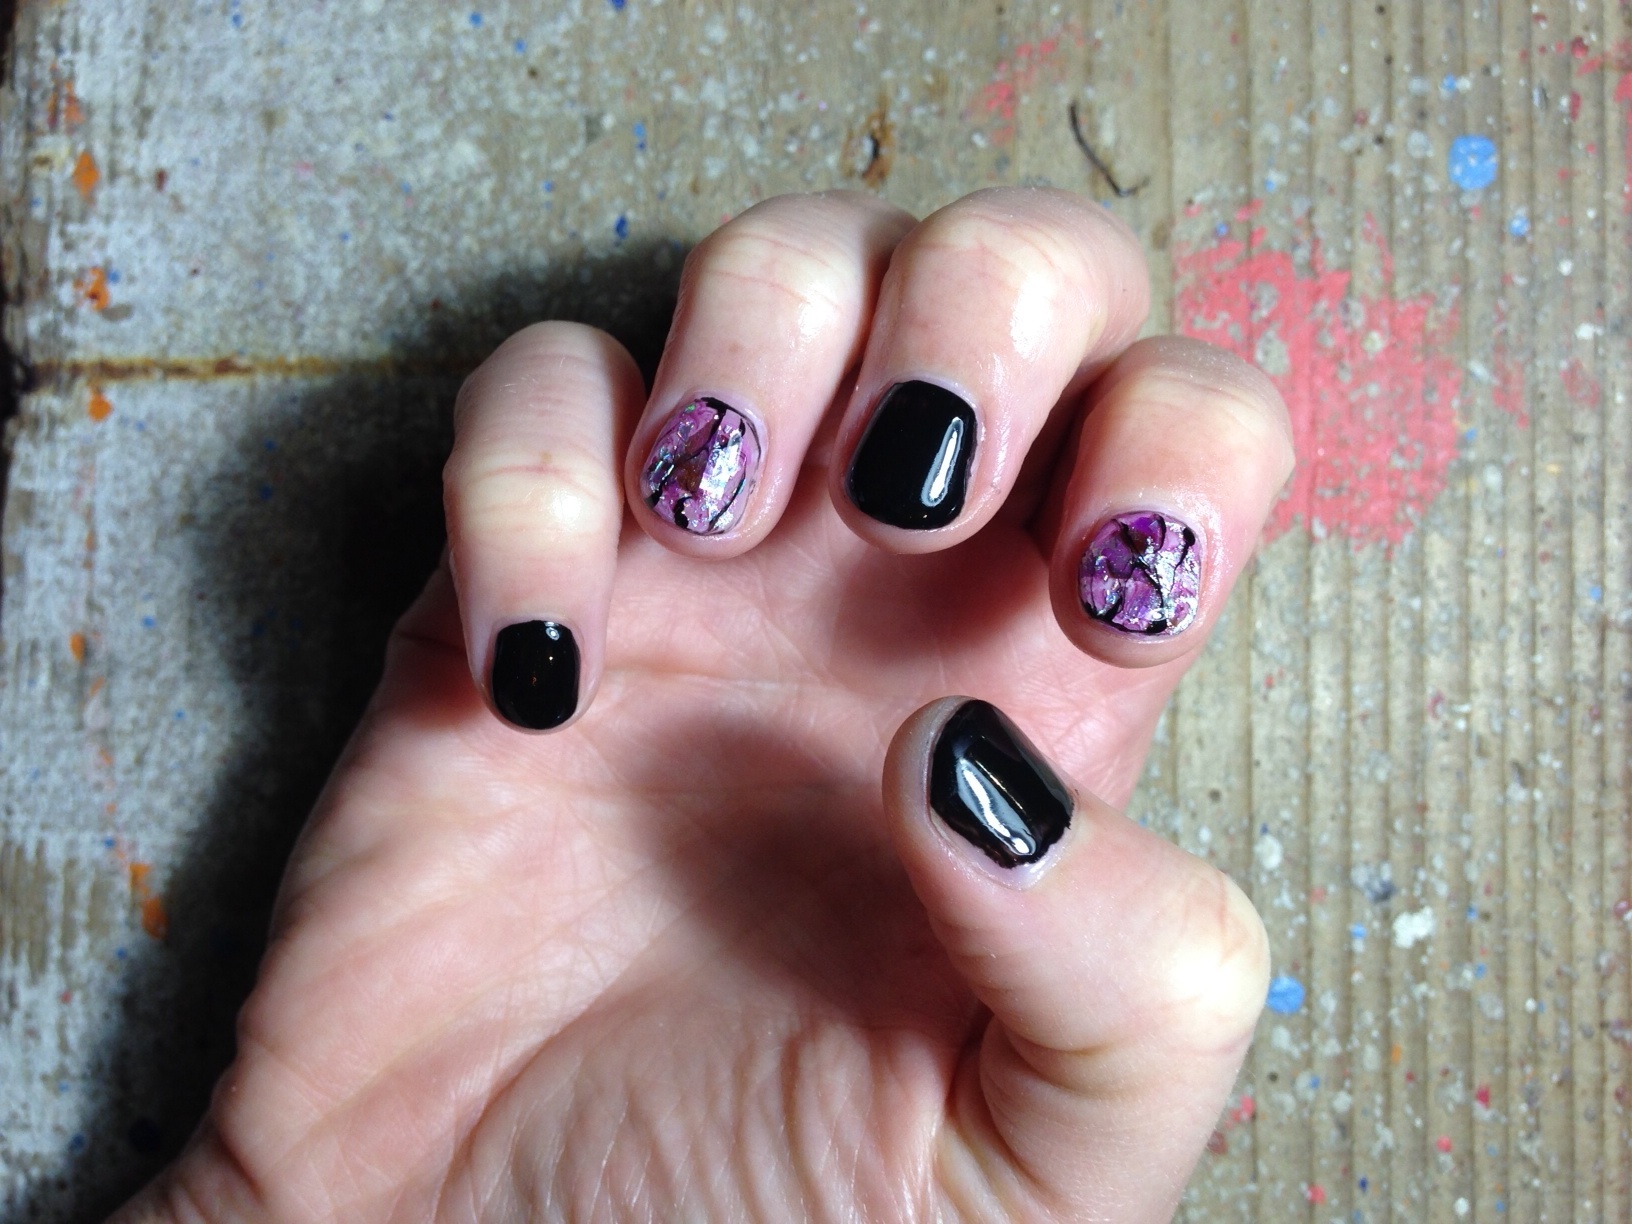 4. Top 10 Best Nail Art Near Me - Last Updated September 2021 - Yelp - wide 5